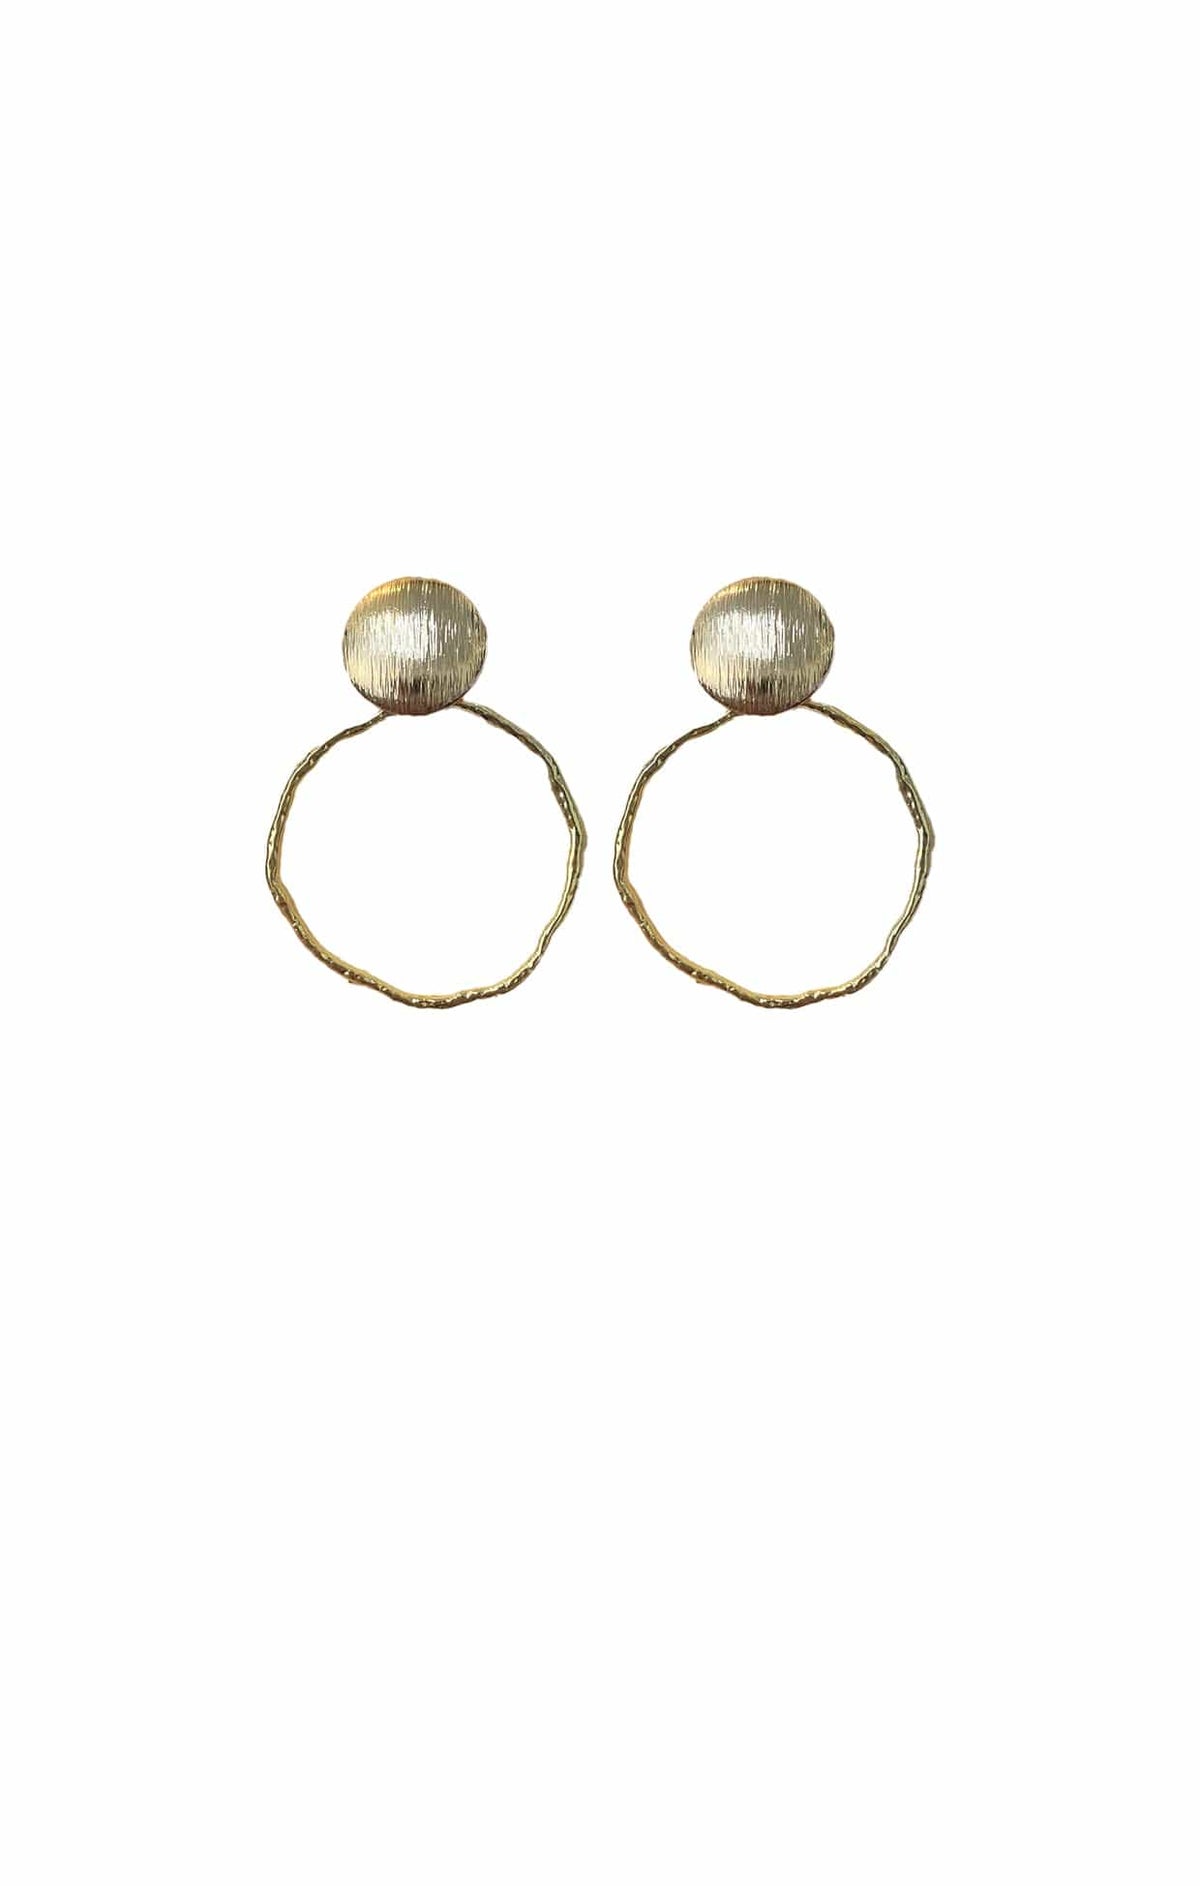 ACCESSORIES Earrings One Size / Neutral HAMMERED HOOPS IN GOLD